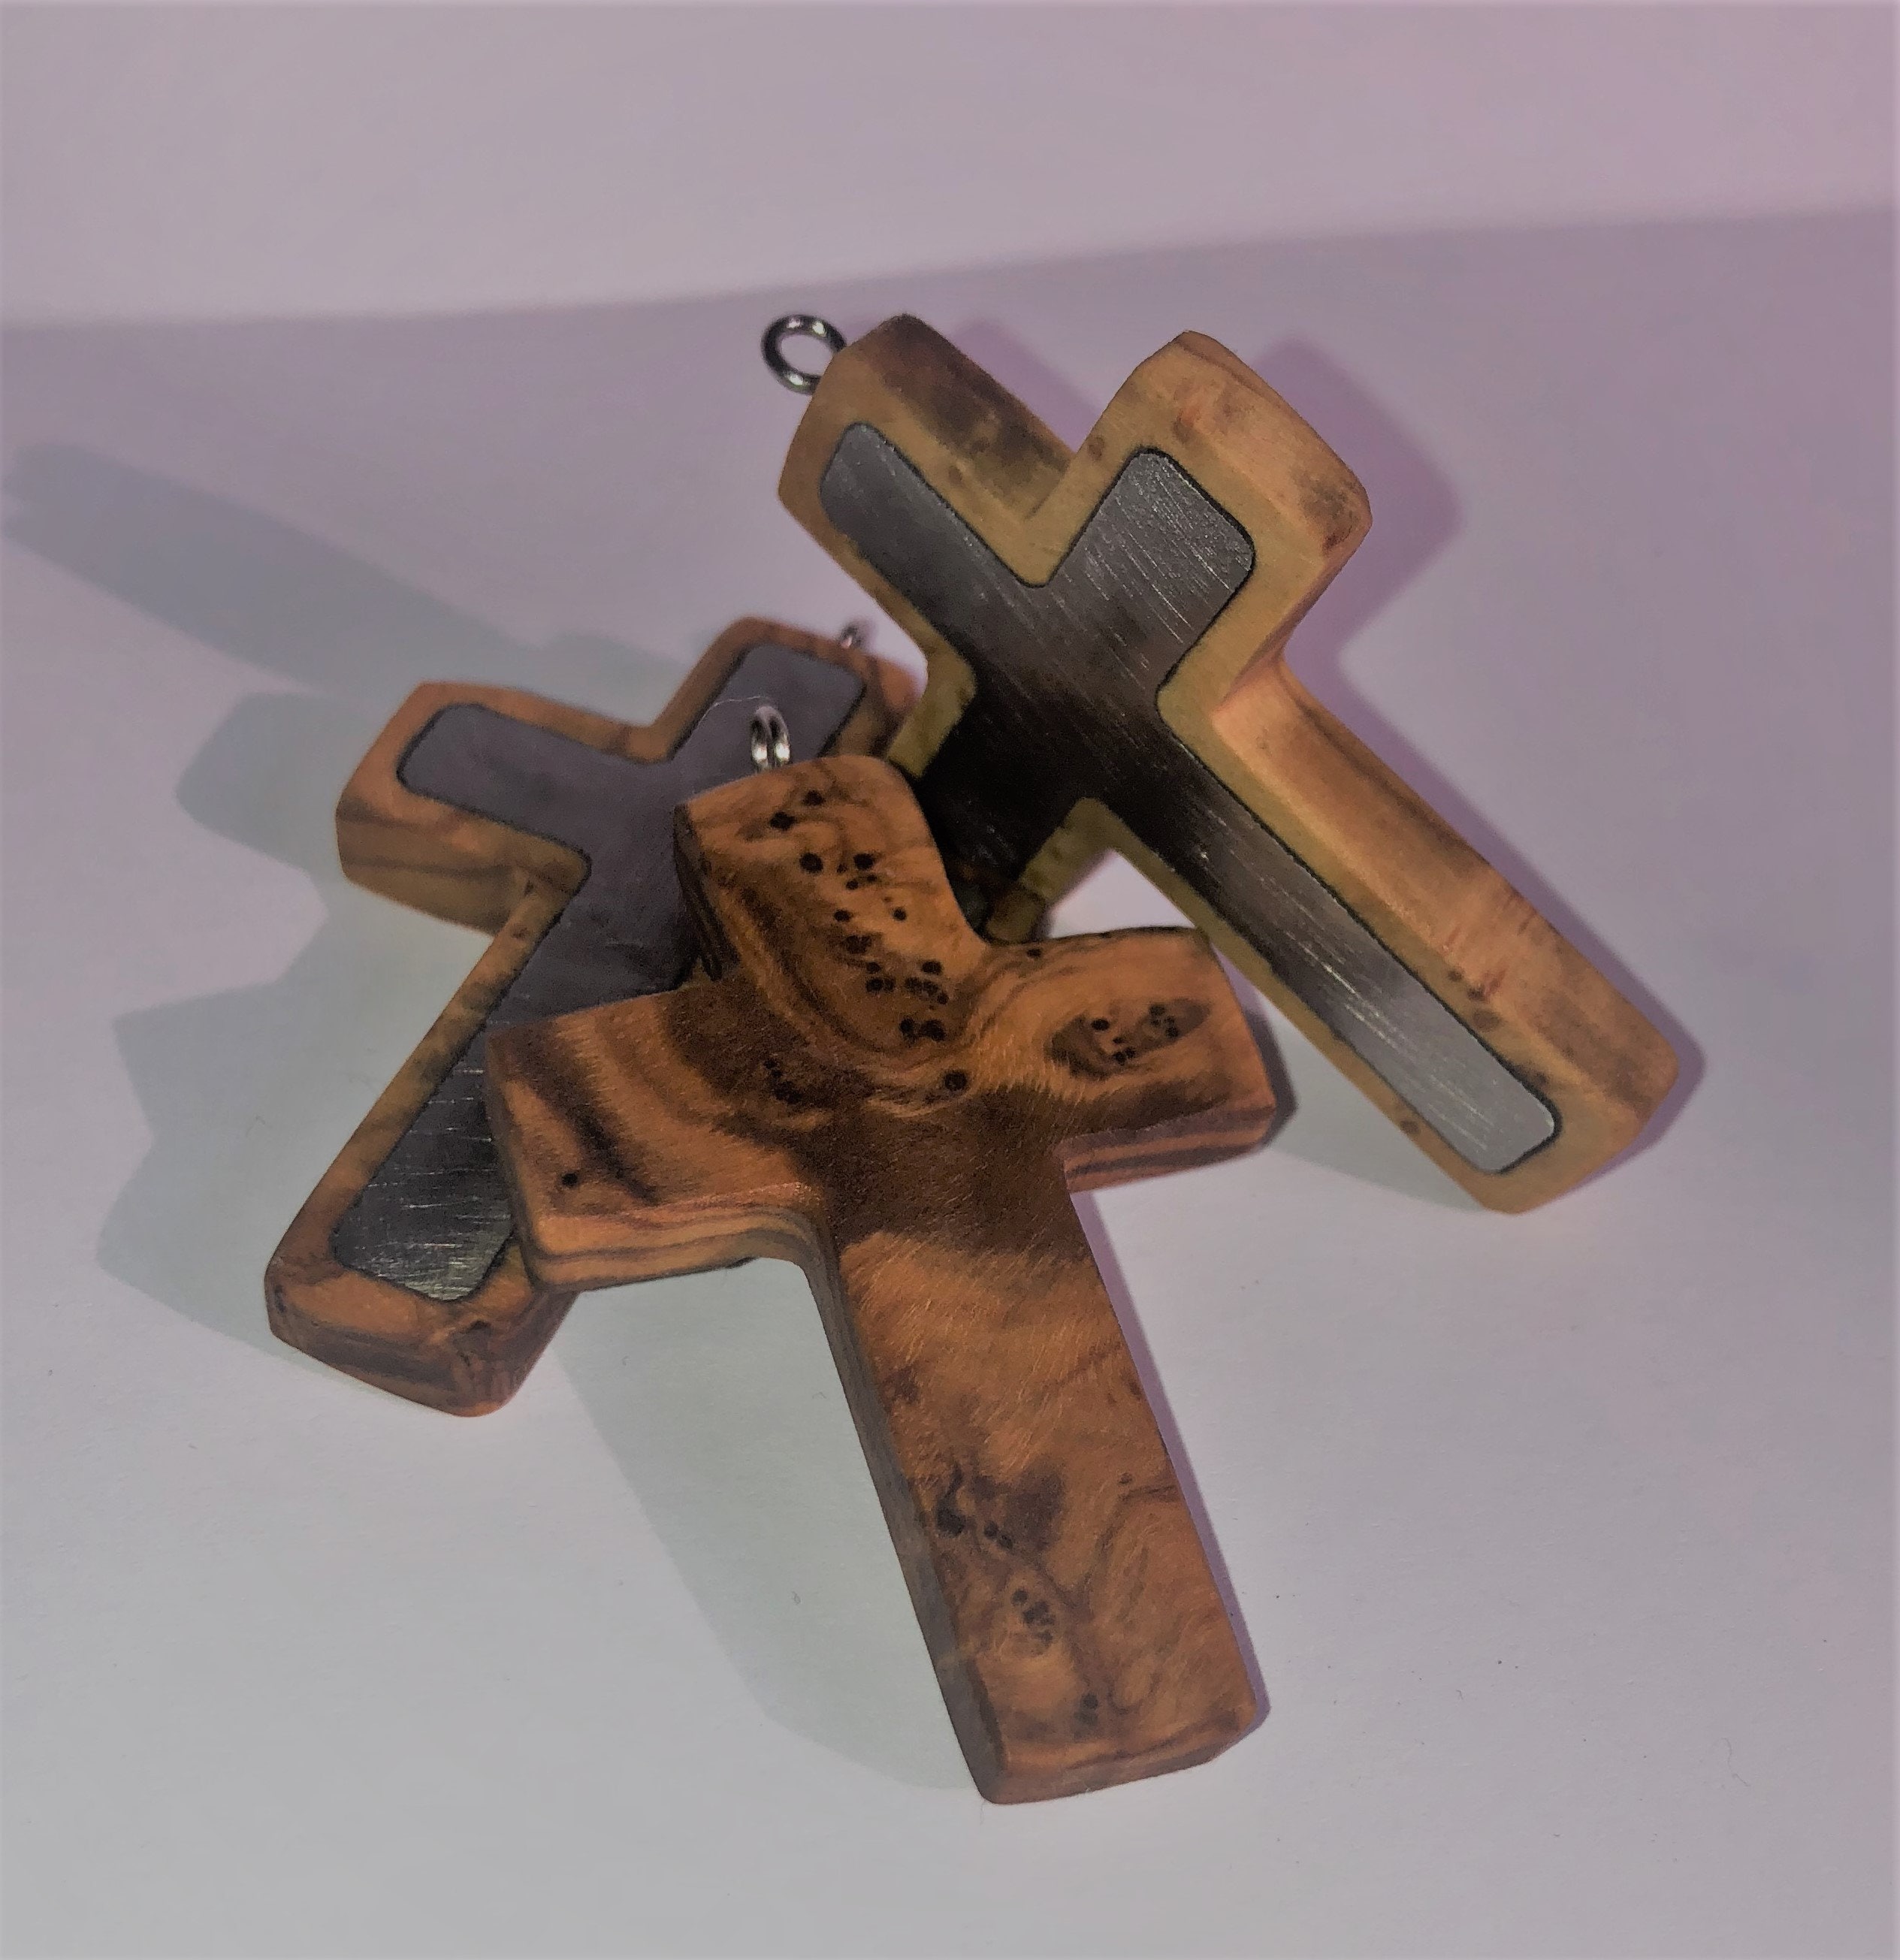 The Holy Cross Wooden Pendant - Genuine Leather Cord - MedieWorld